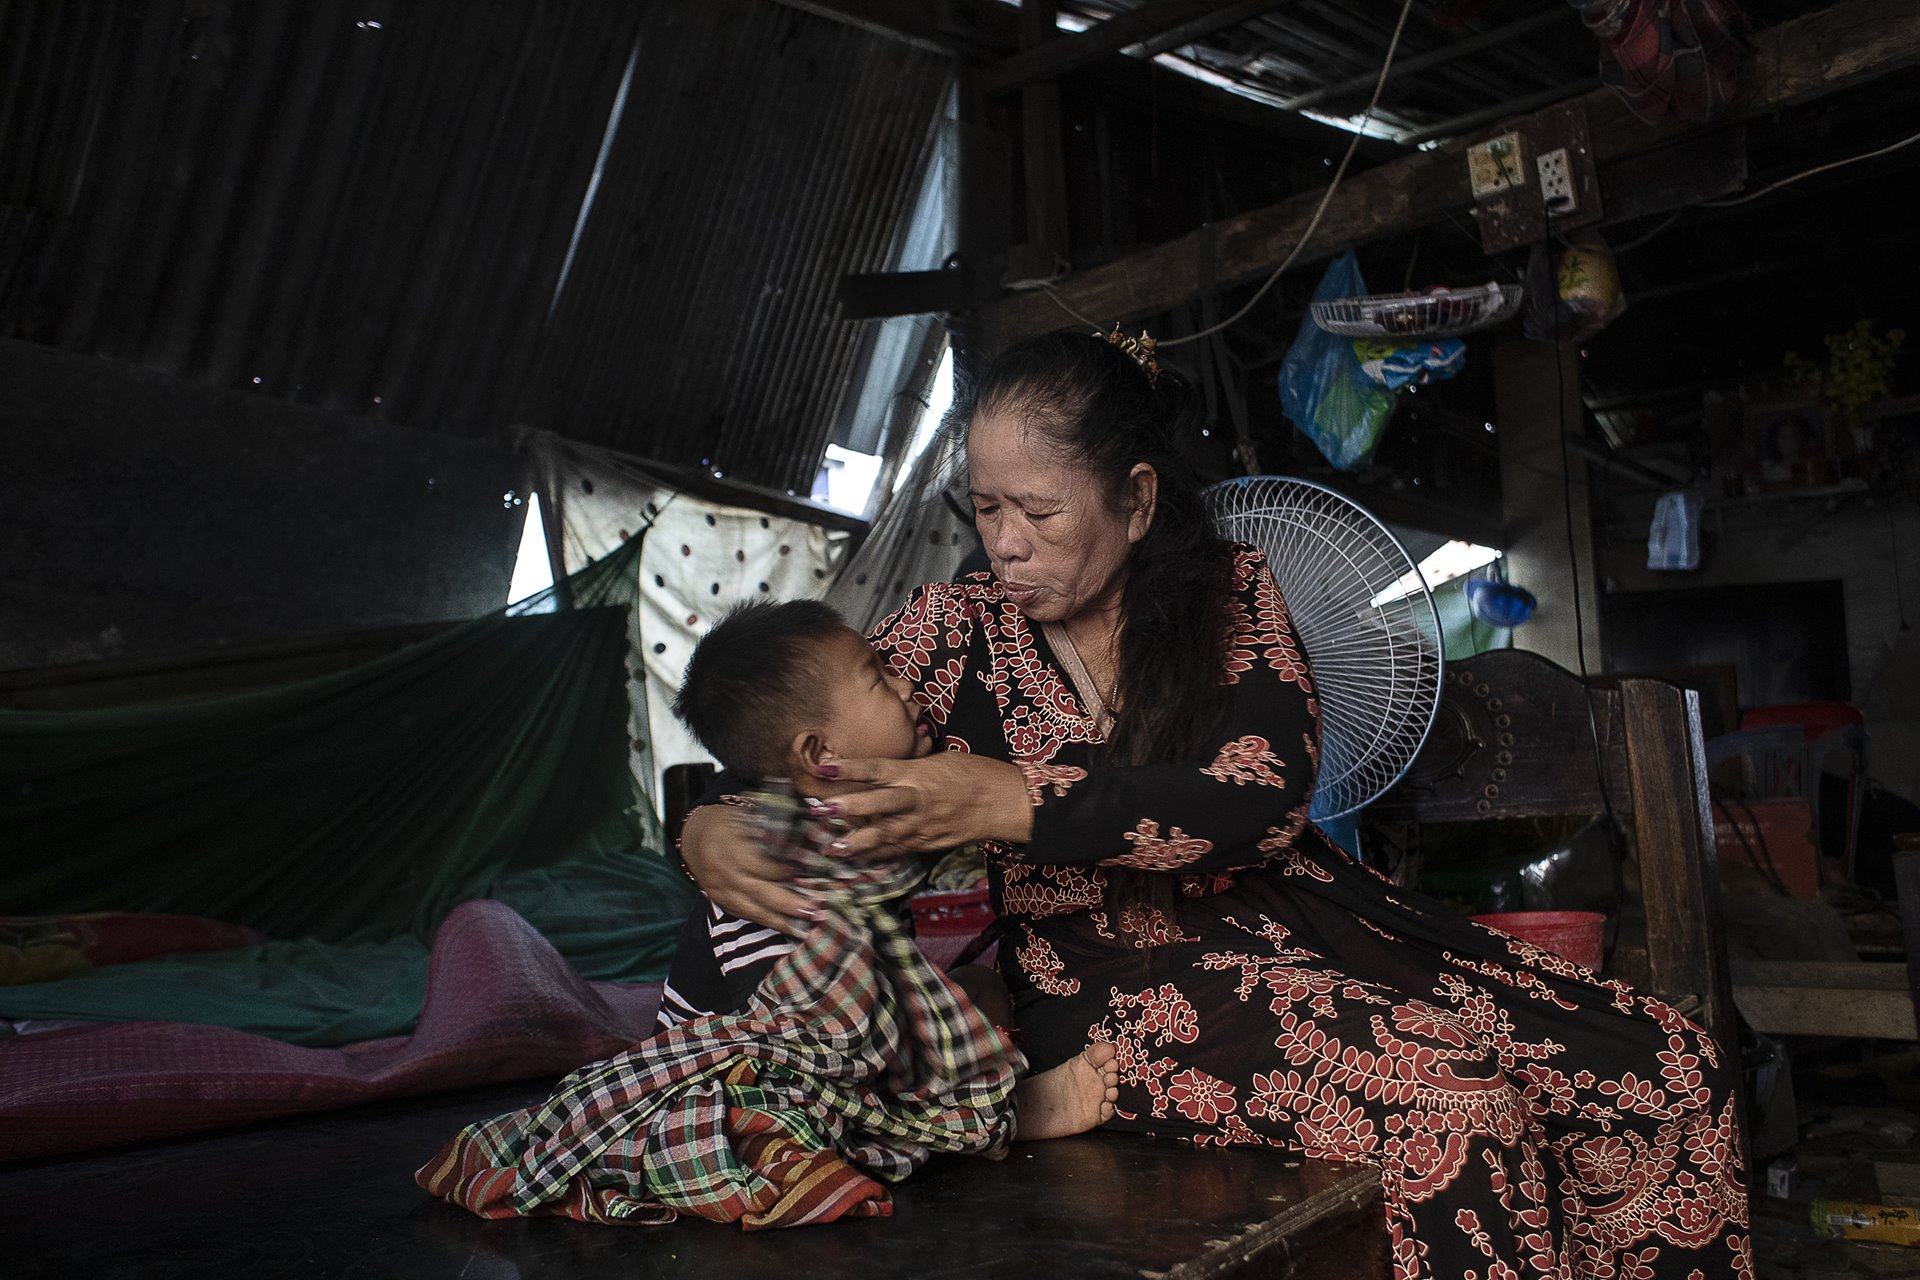 <p>Chandarayoth Pheap (3) is comforted by his grandmother, Bonan Ky, at his surrogate mother Sreyroth&rsquo;s home in Phnom Penh, Cambodia. His grandmother takes care of him while both his parents work.</p>
